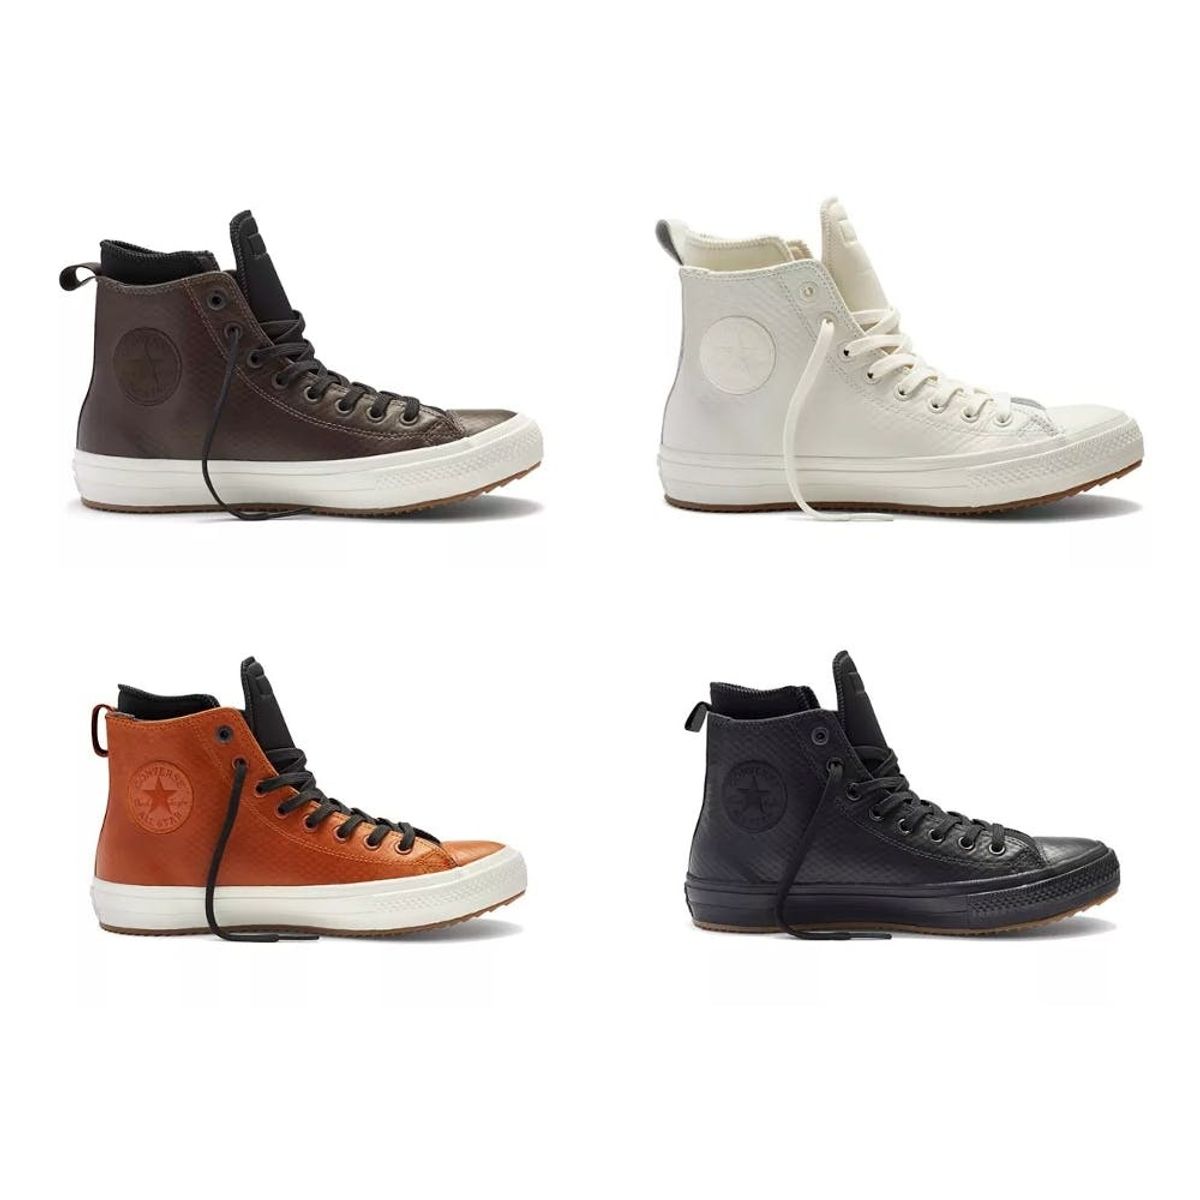 Converse Has Just Released THE Must-Have Boots for Winter